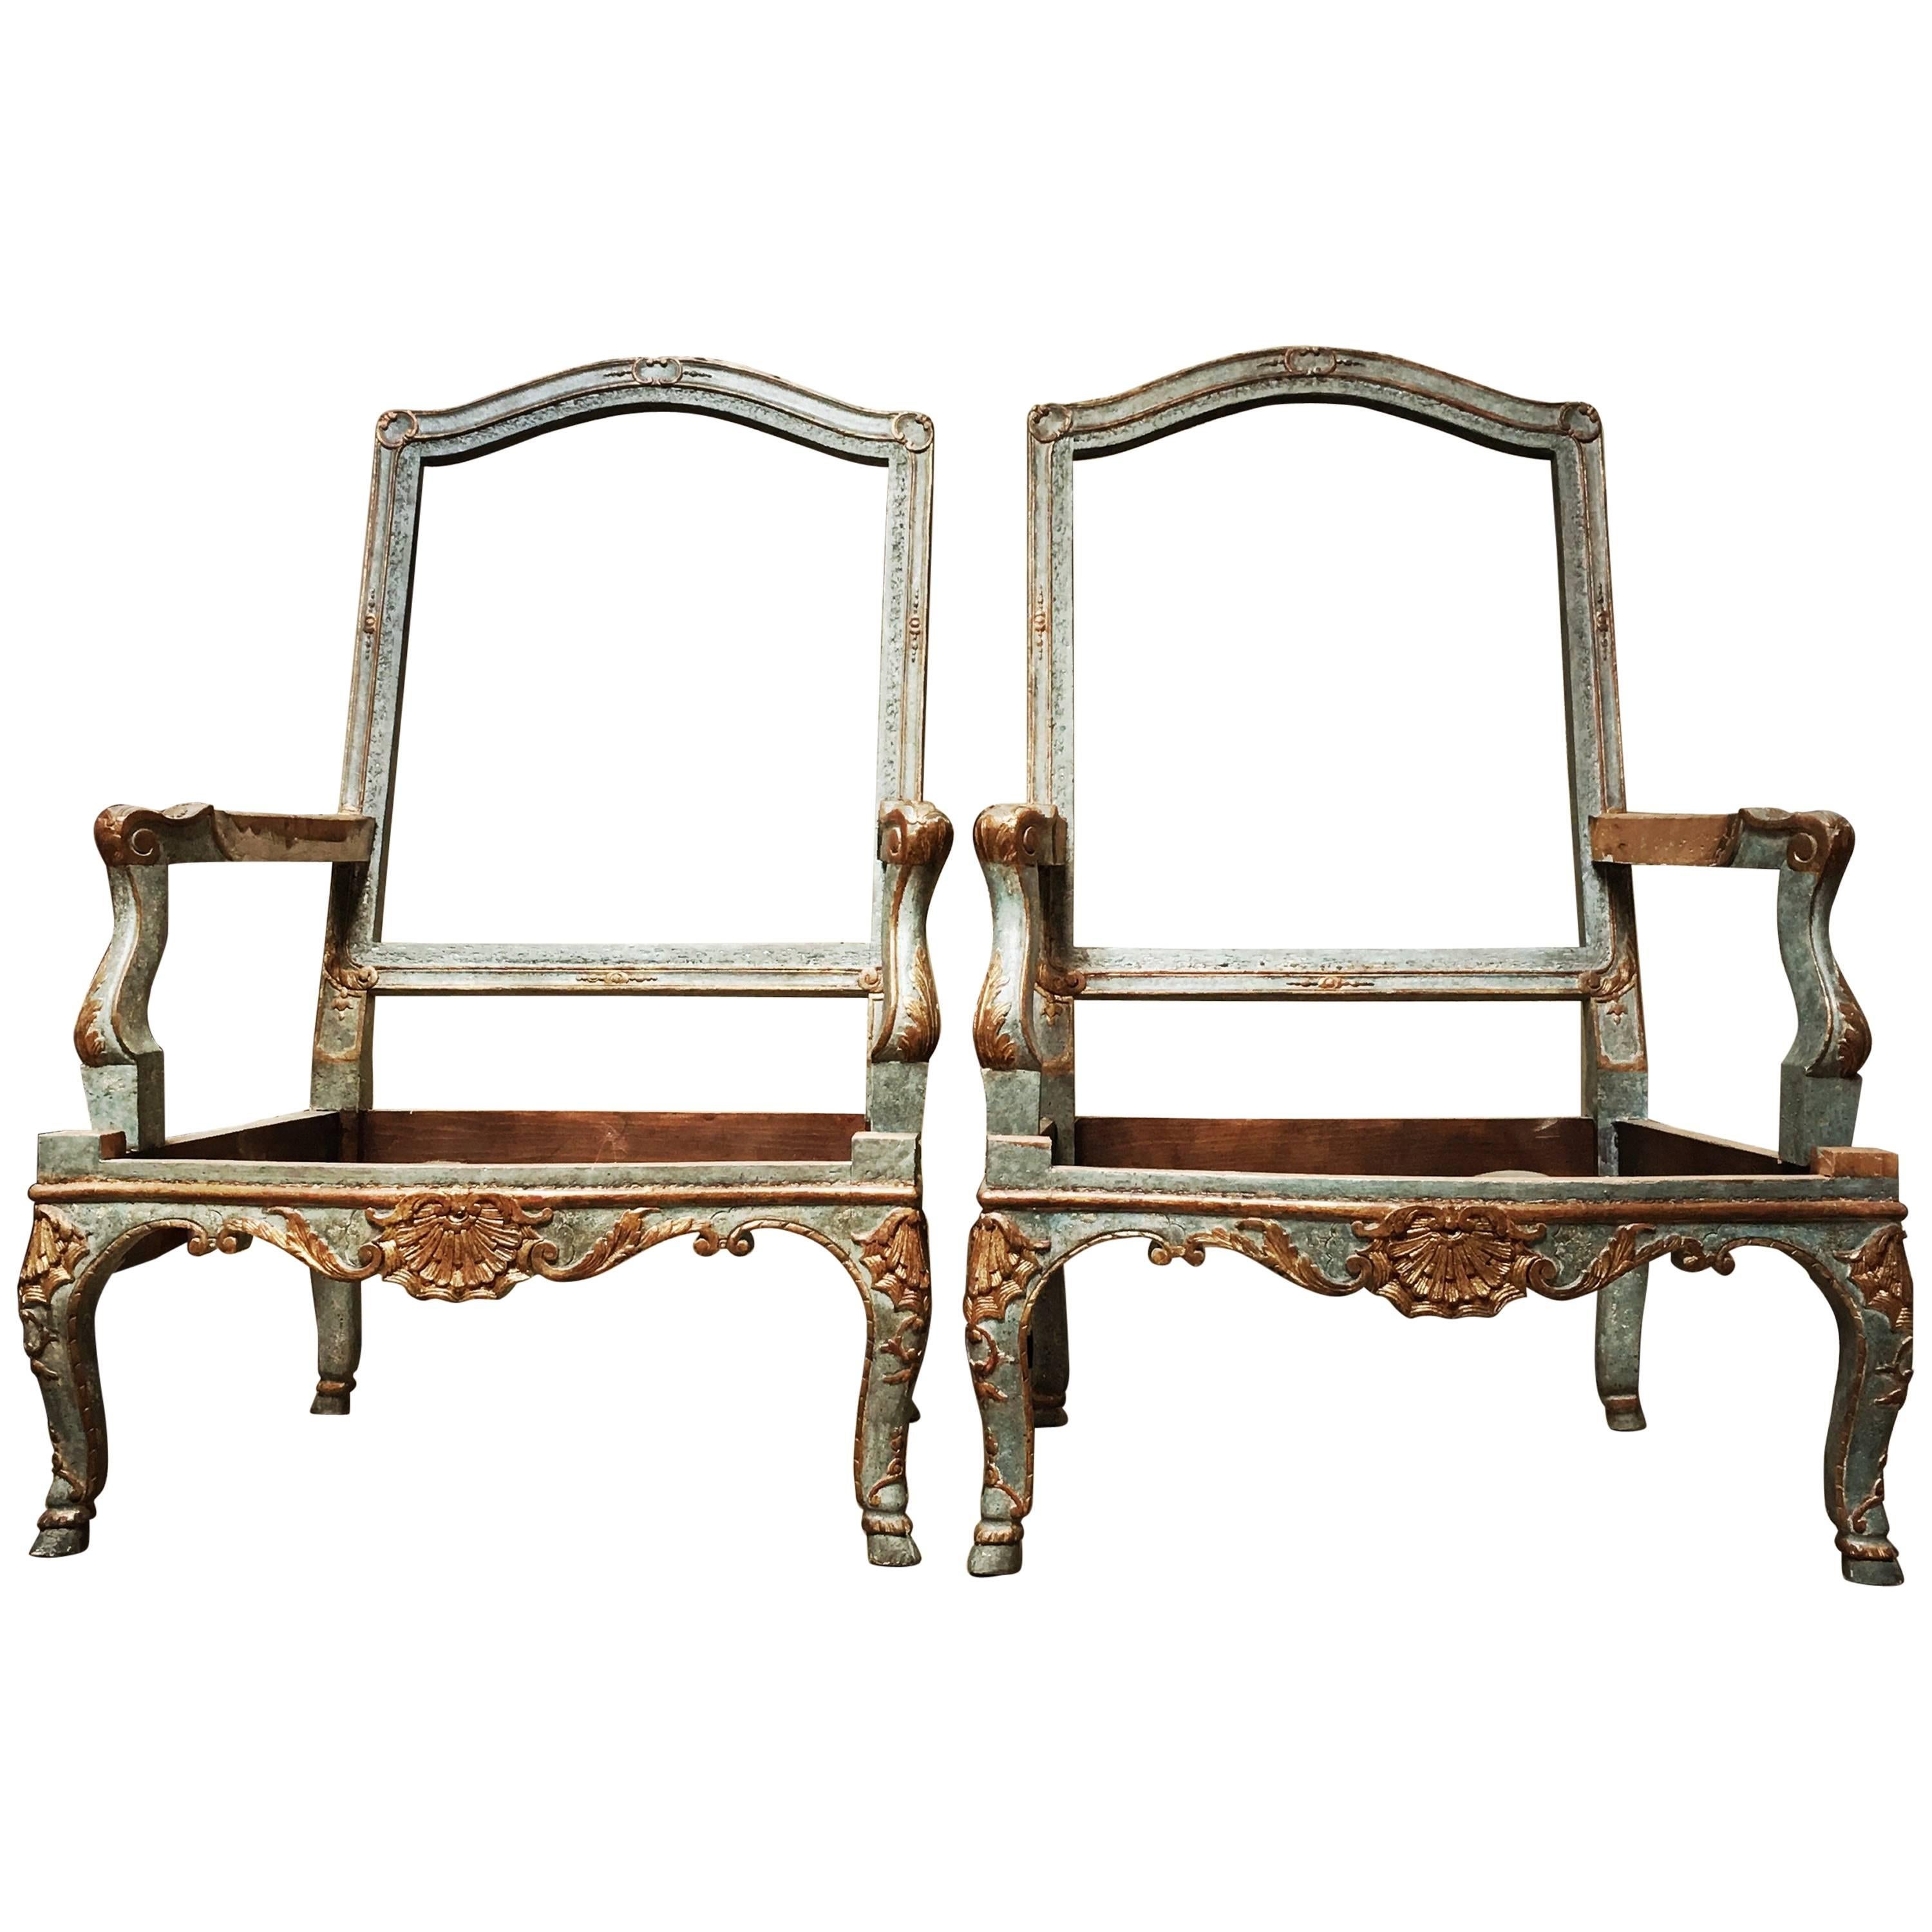 Pair of French Baroque Style Armchair Frames in a Blue and Gilt Finish For Sale